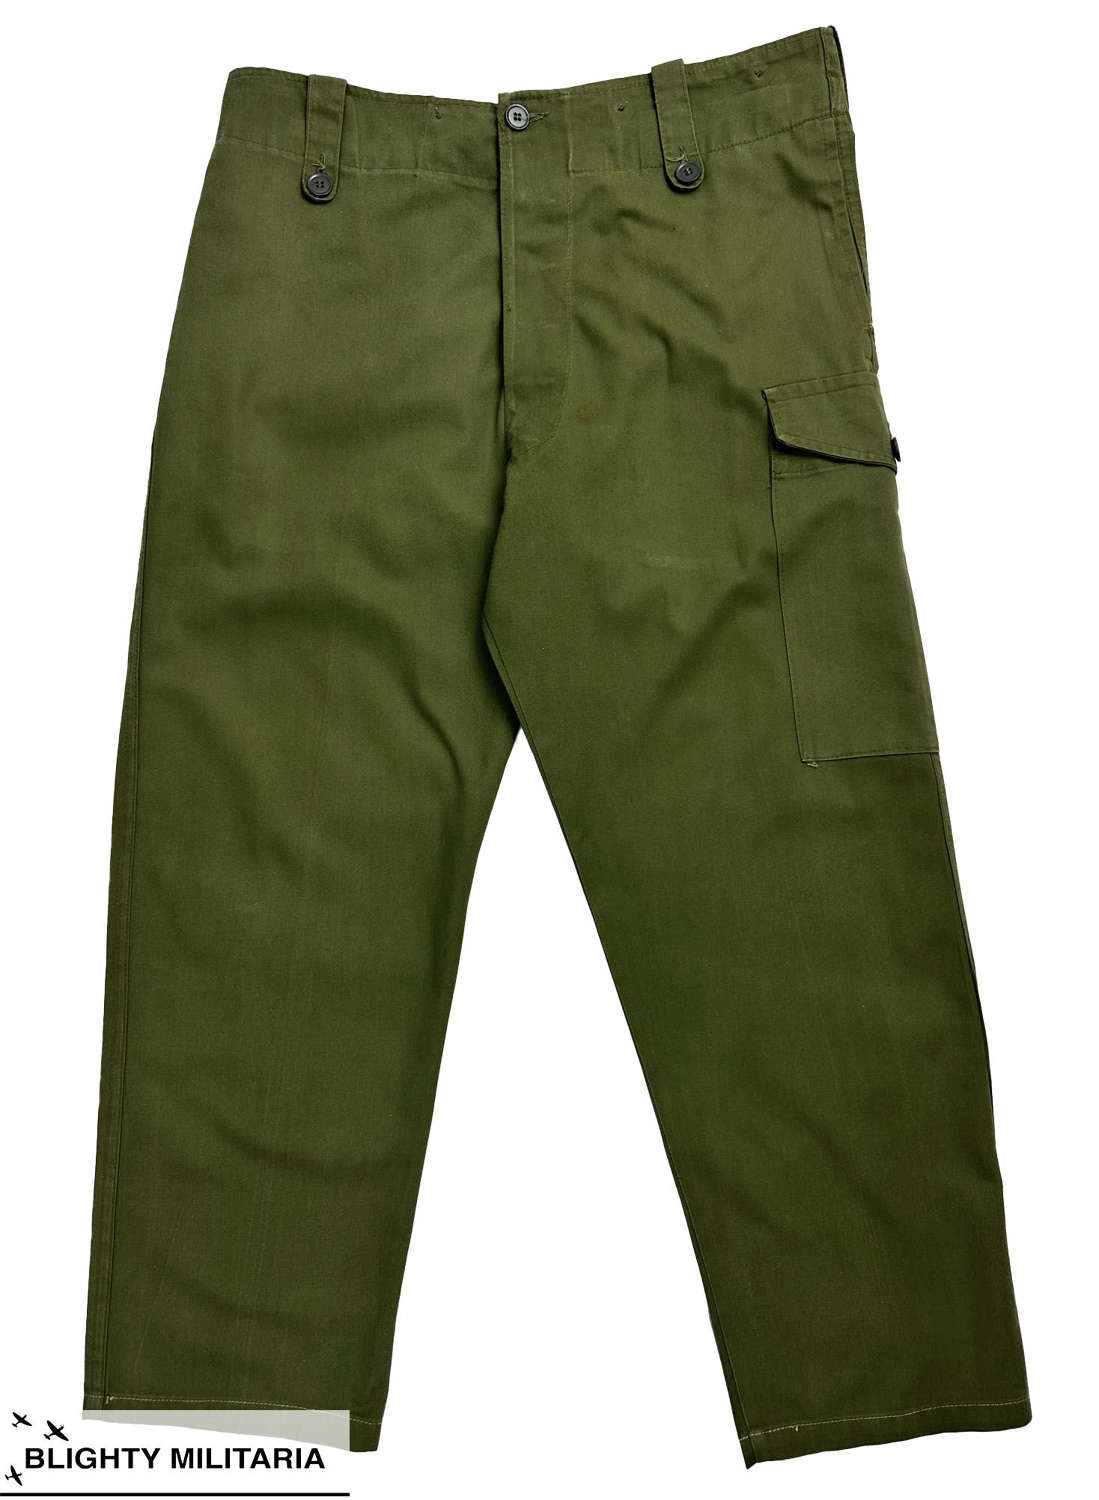 Original 1970s British Army Overall Green Trousers - Size 3 37x28